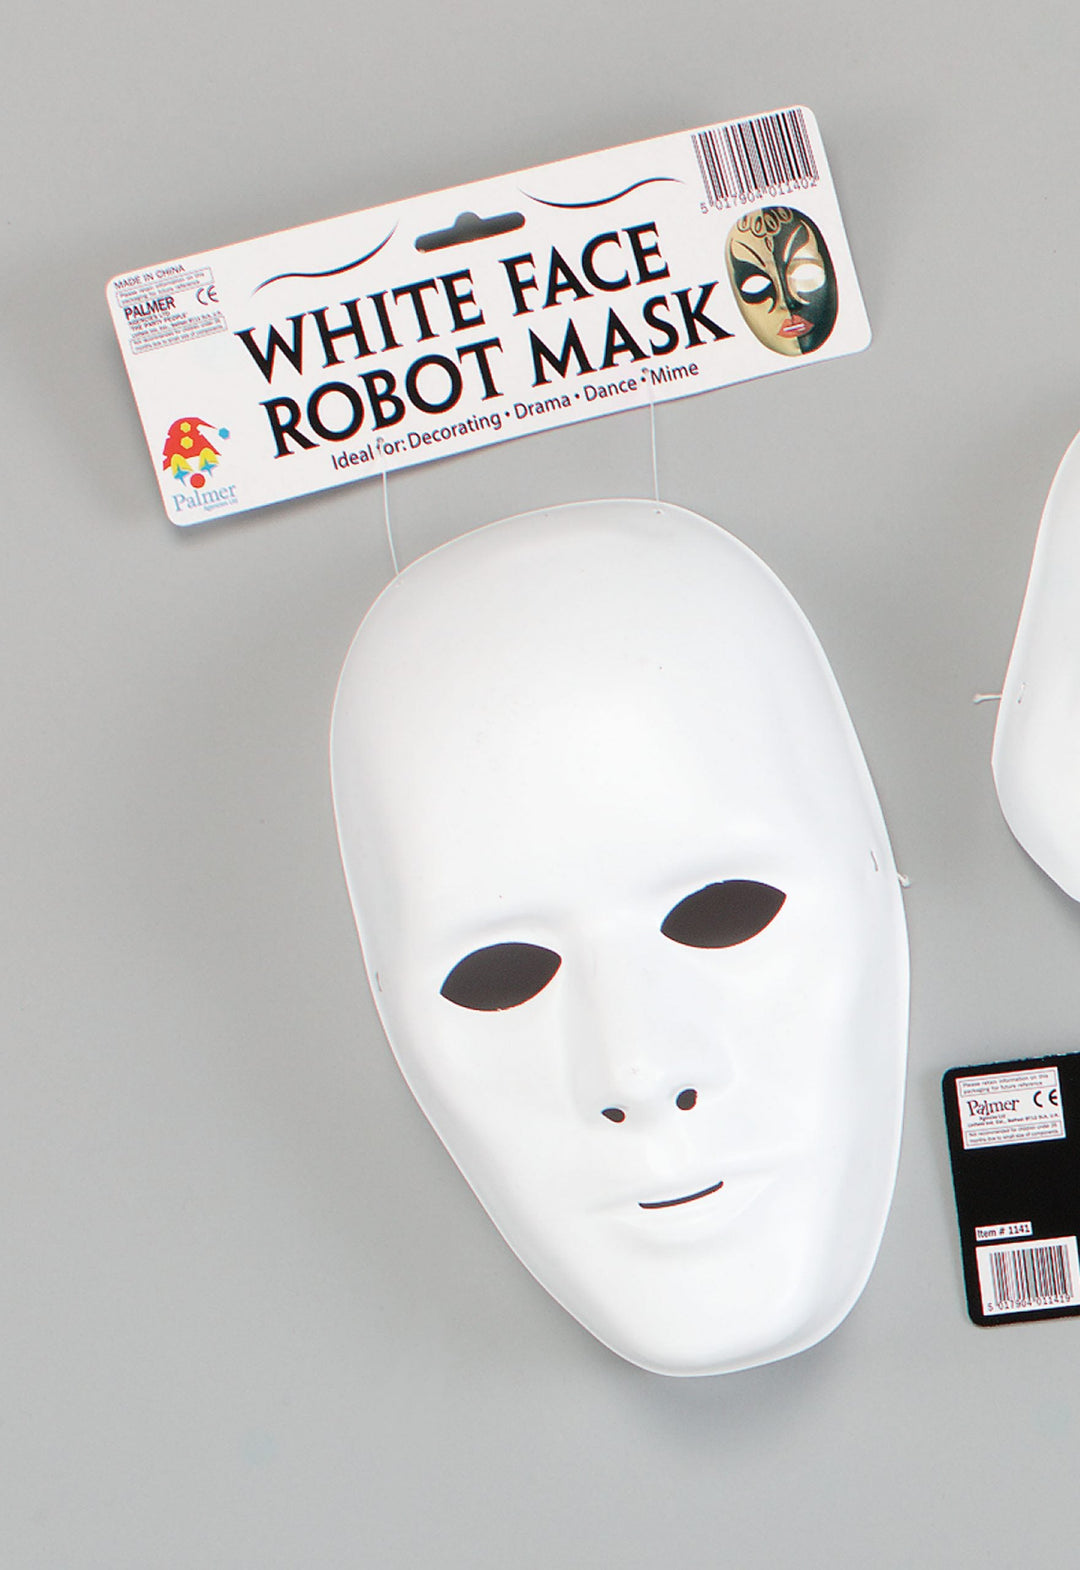 Mens Deluxe Male Face Mask White Plastic Masks Cardboard Halloween Costume_1 PM107